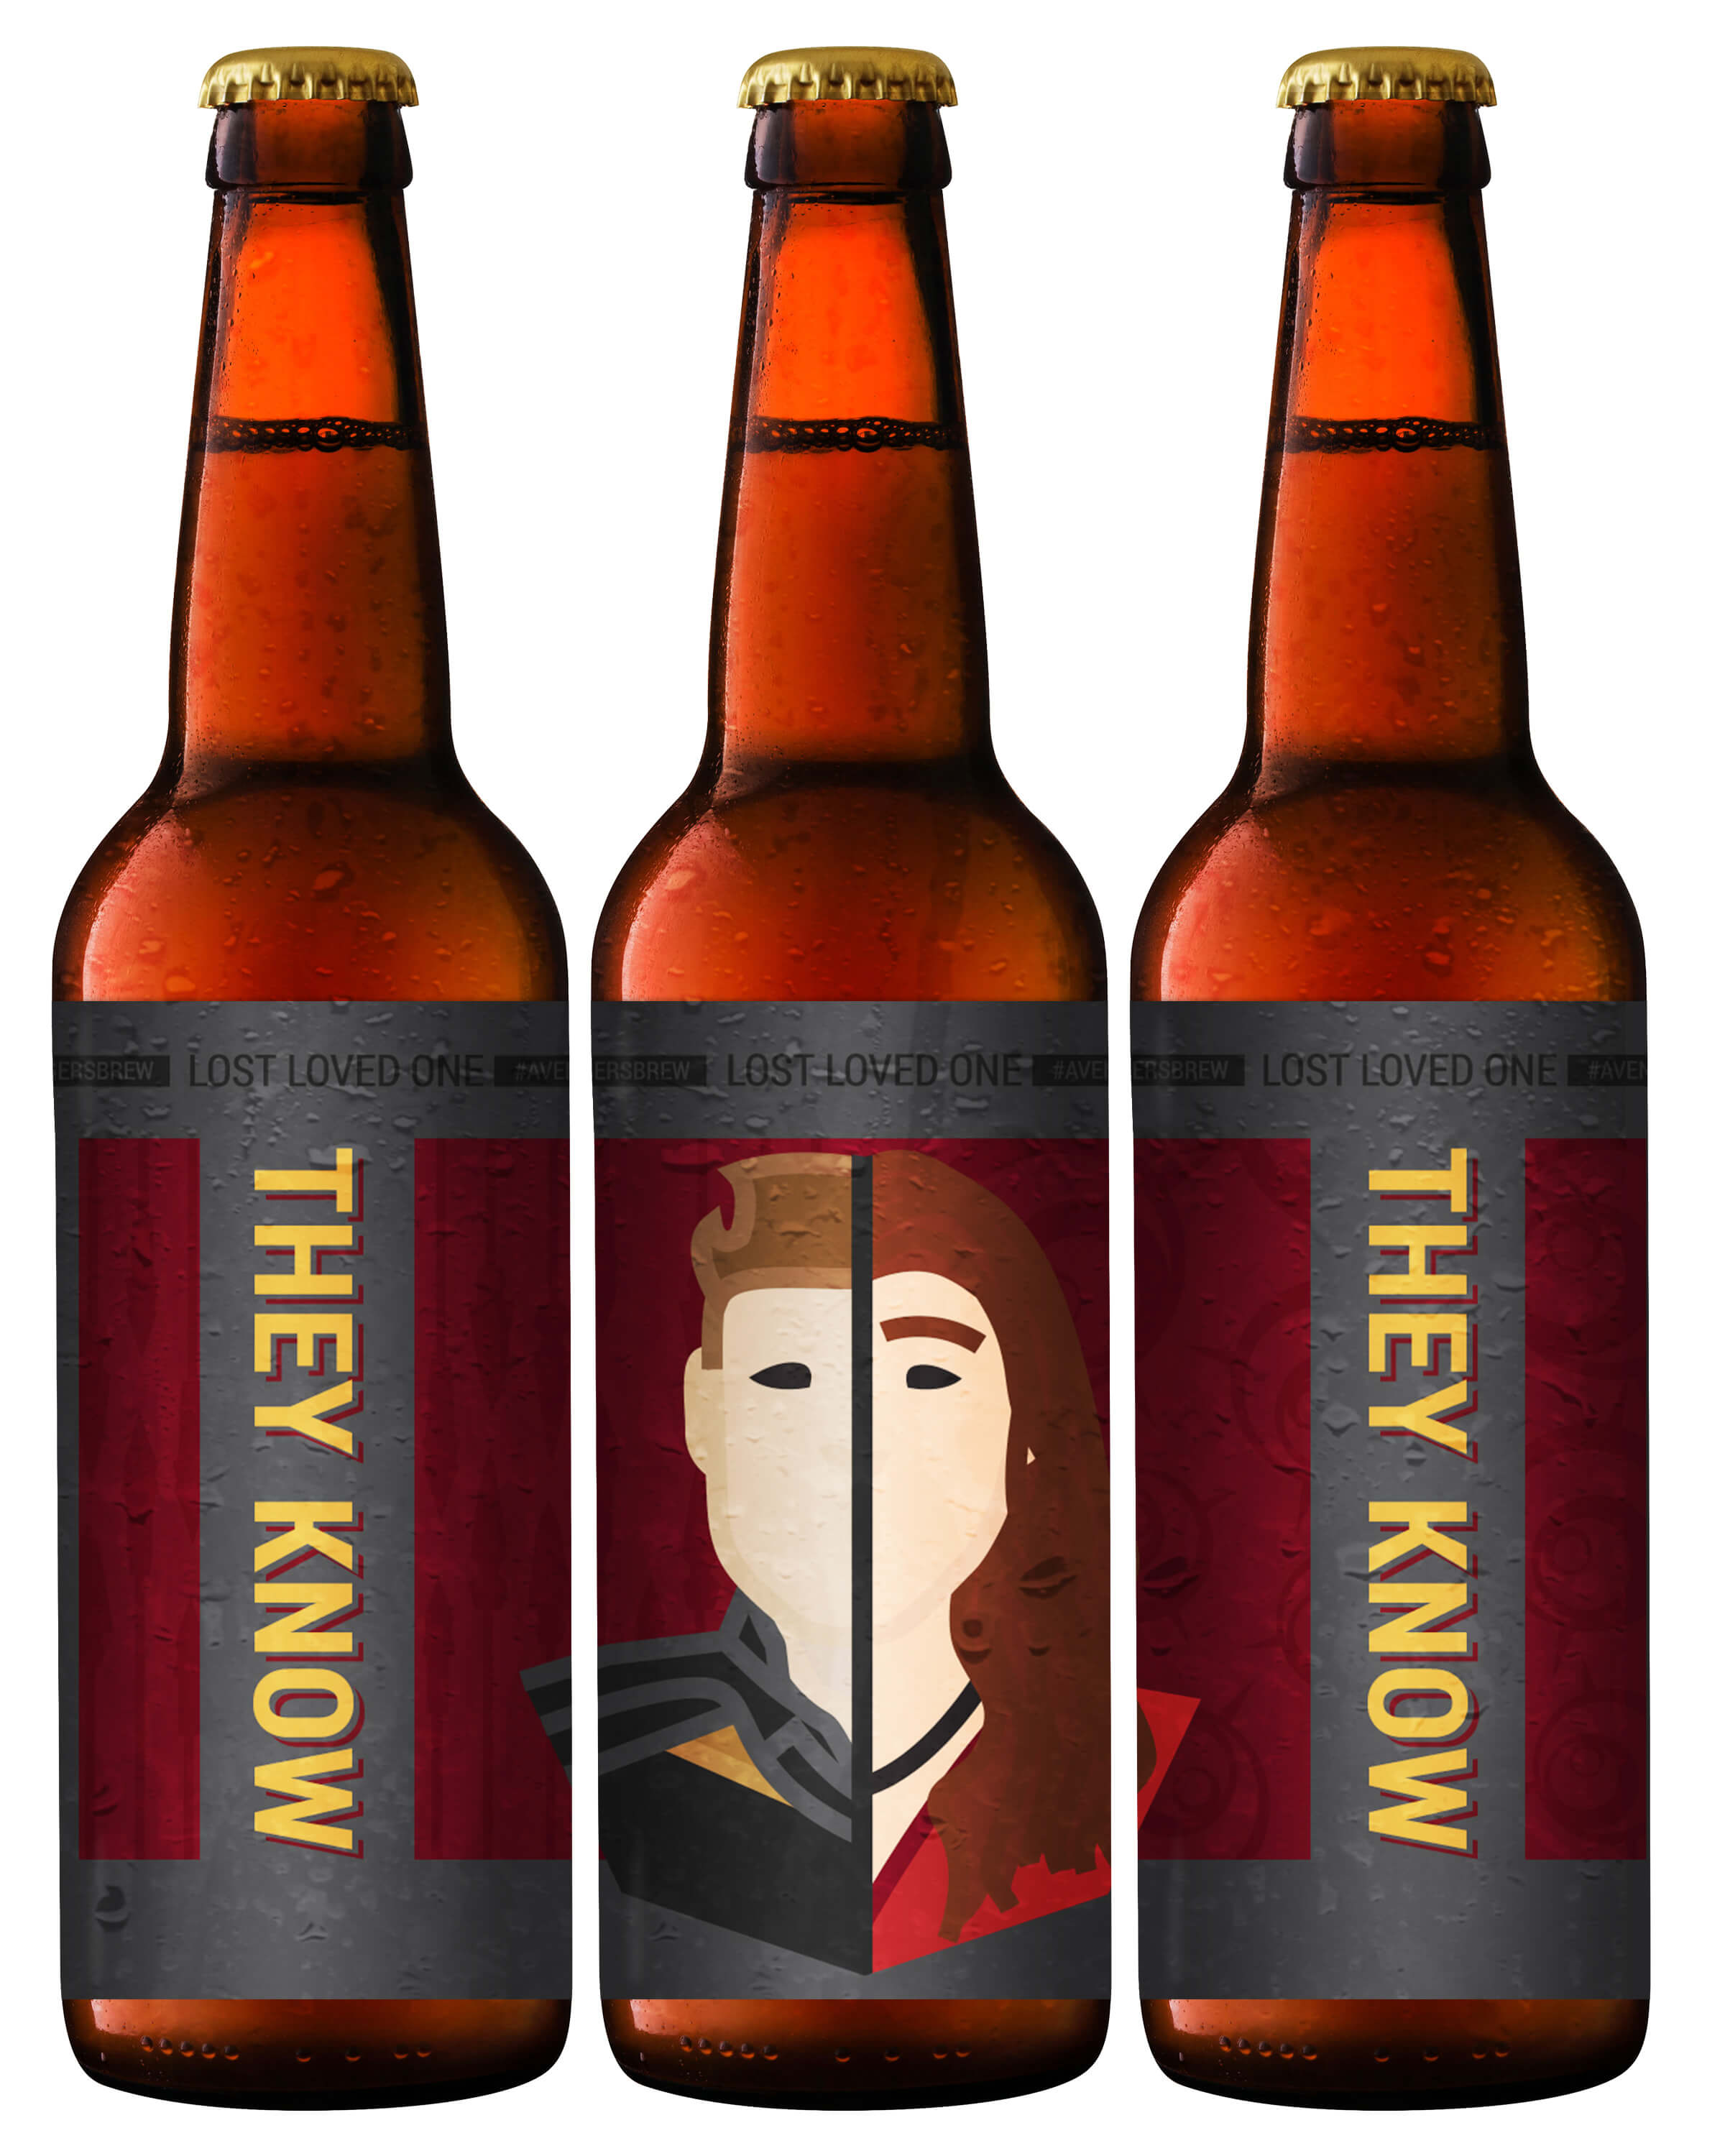 Avengers Brew: They Know Printable Beer Label